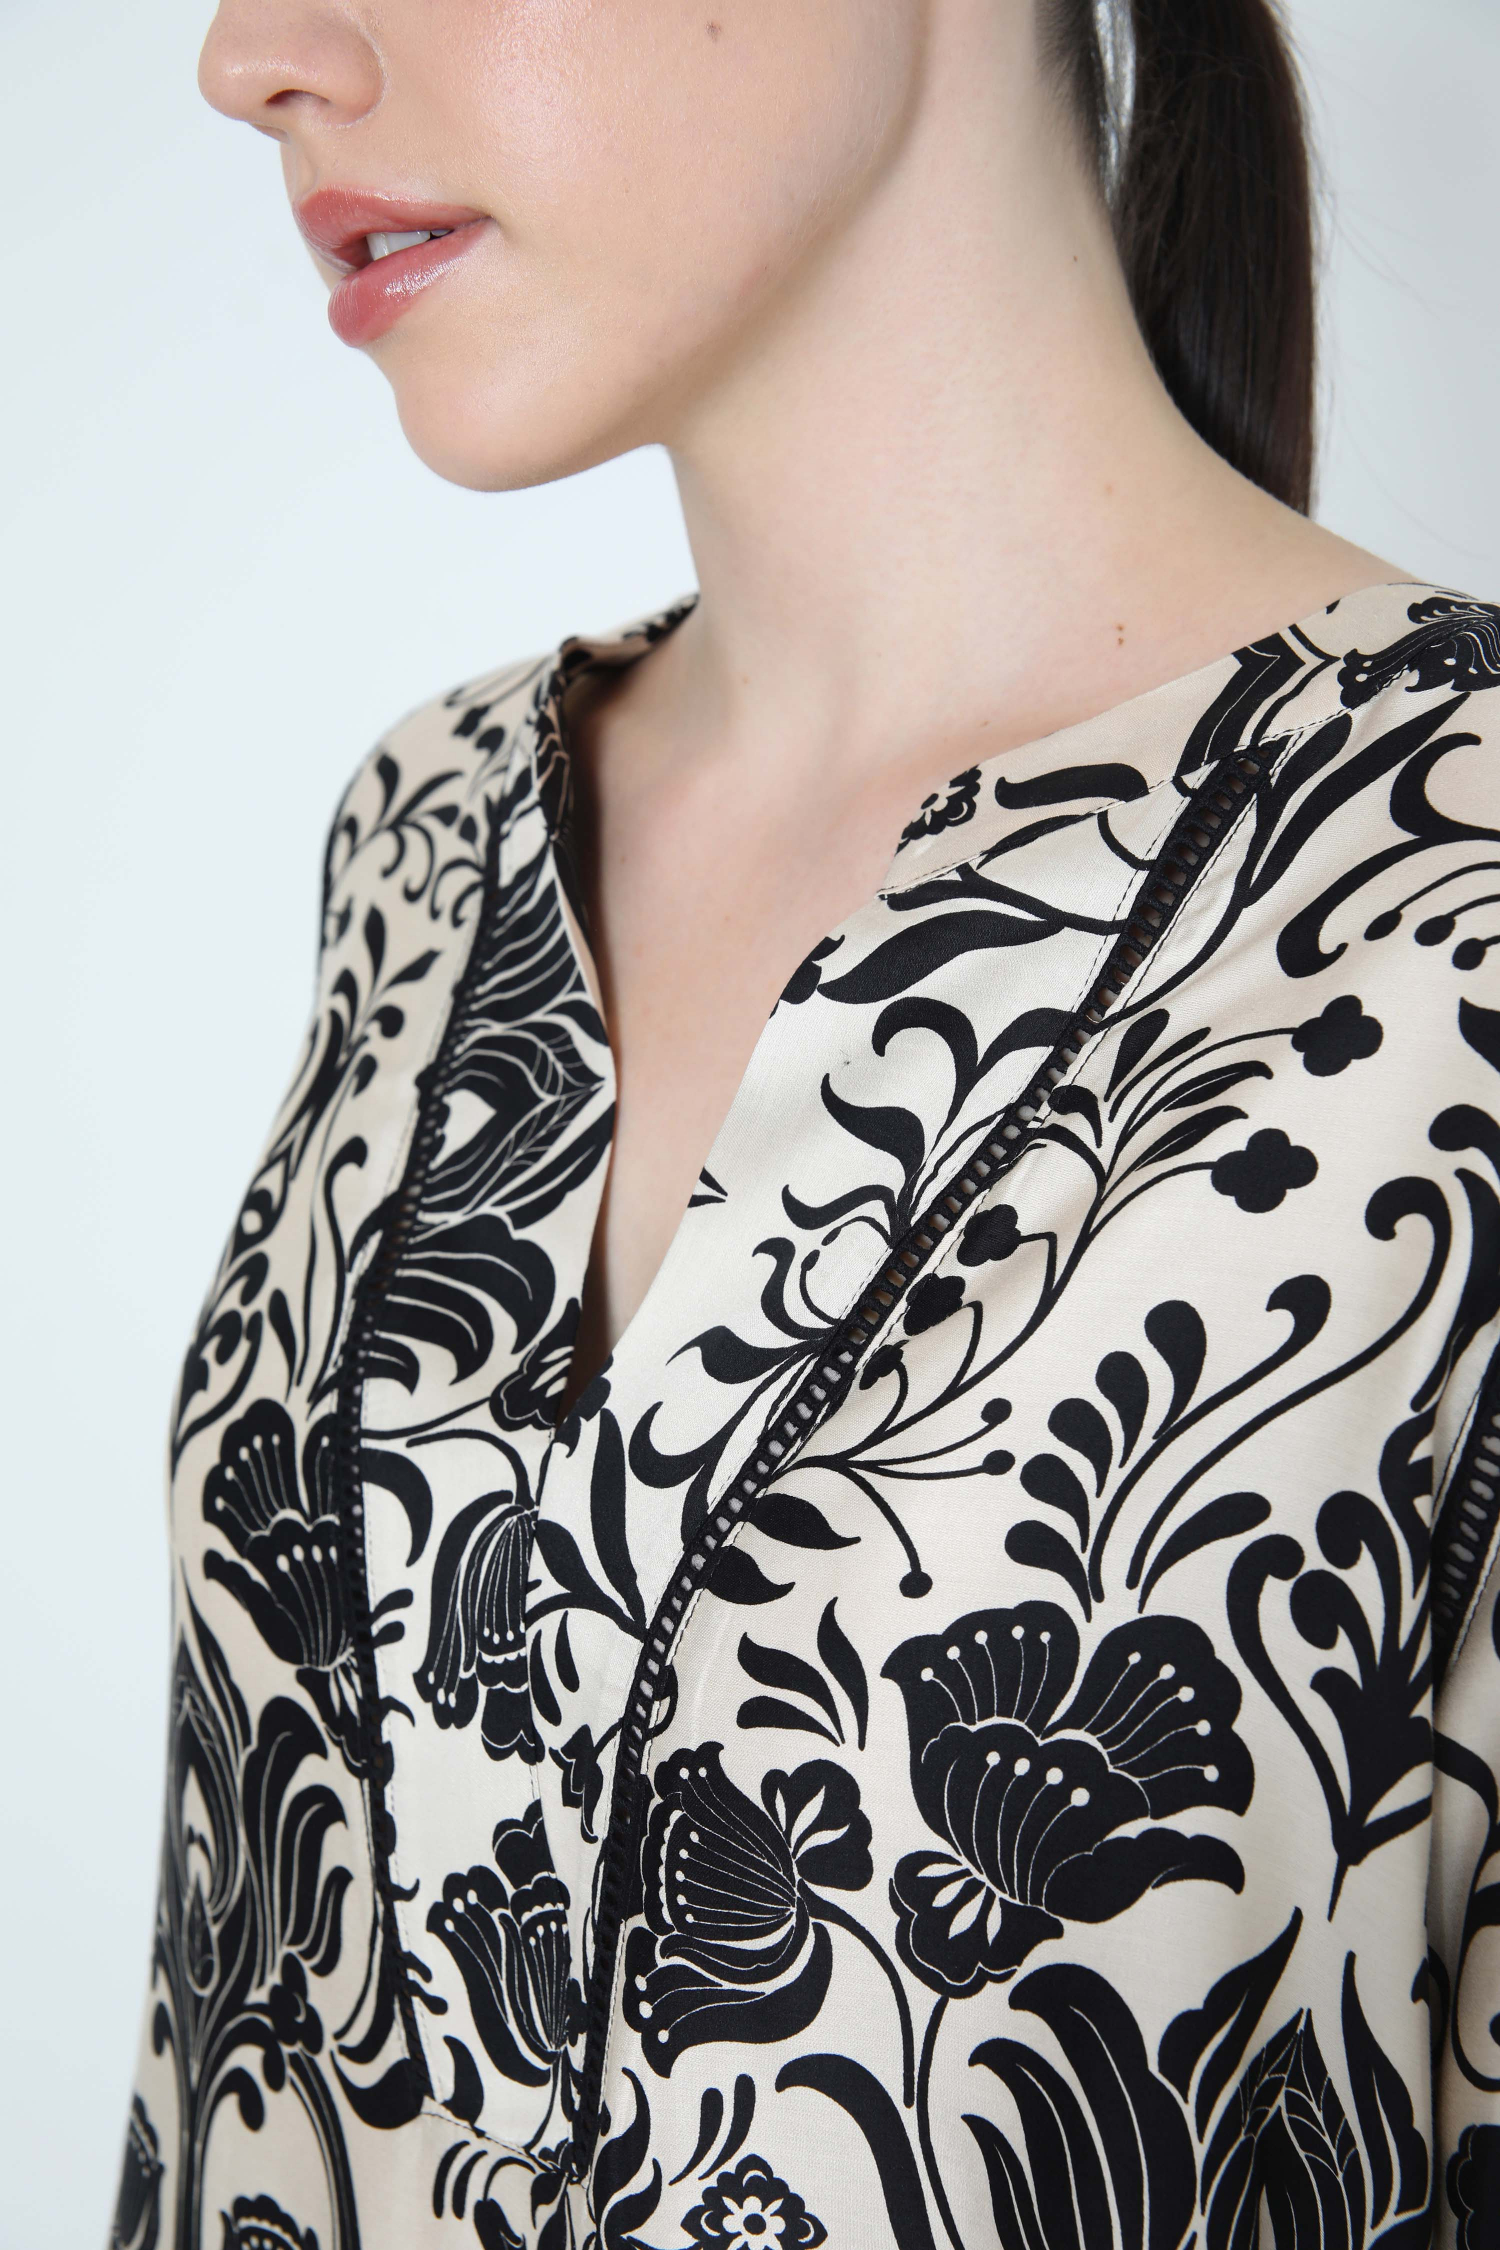 printed blouse with a satin effect base